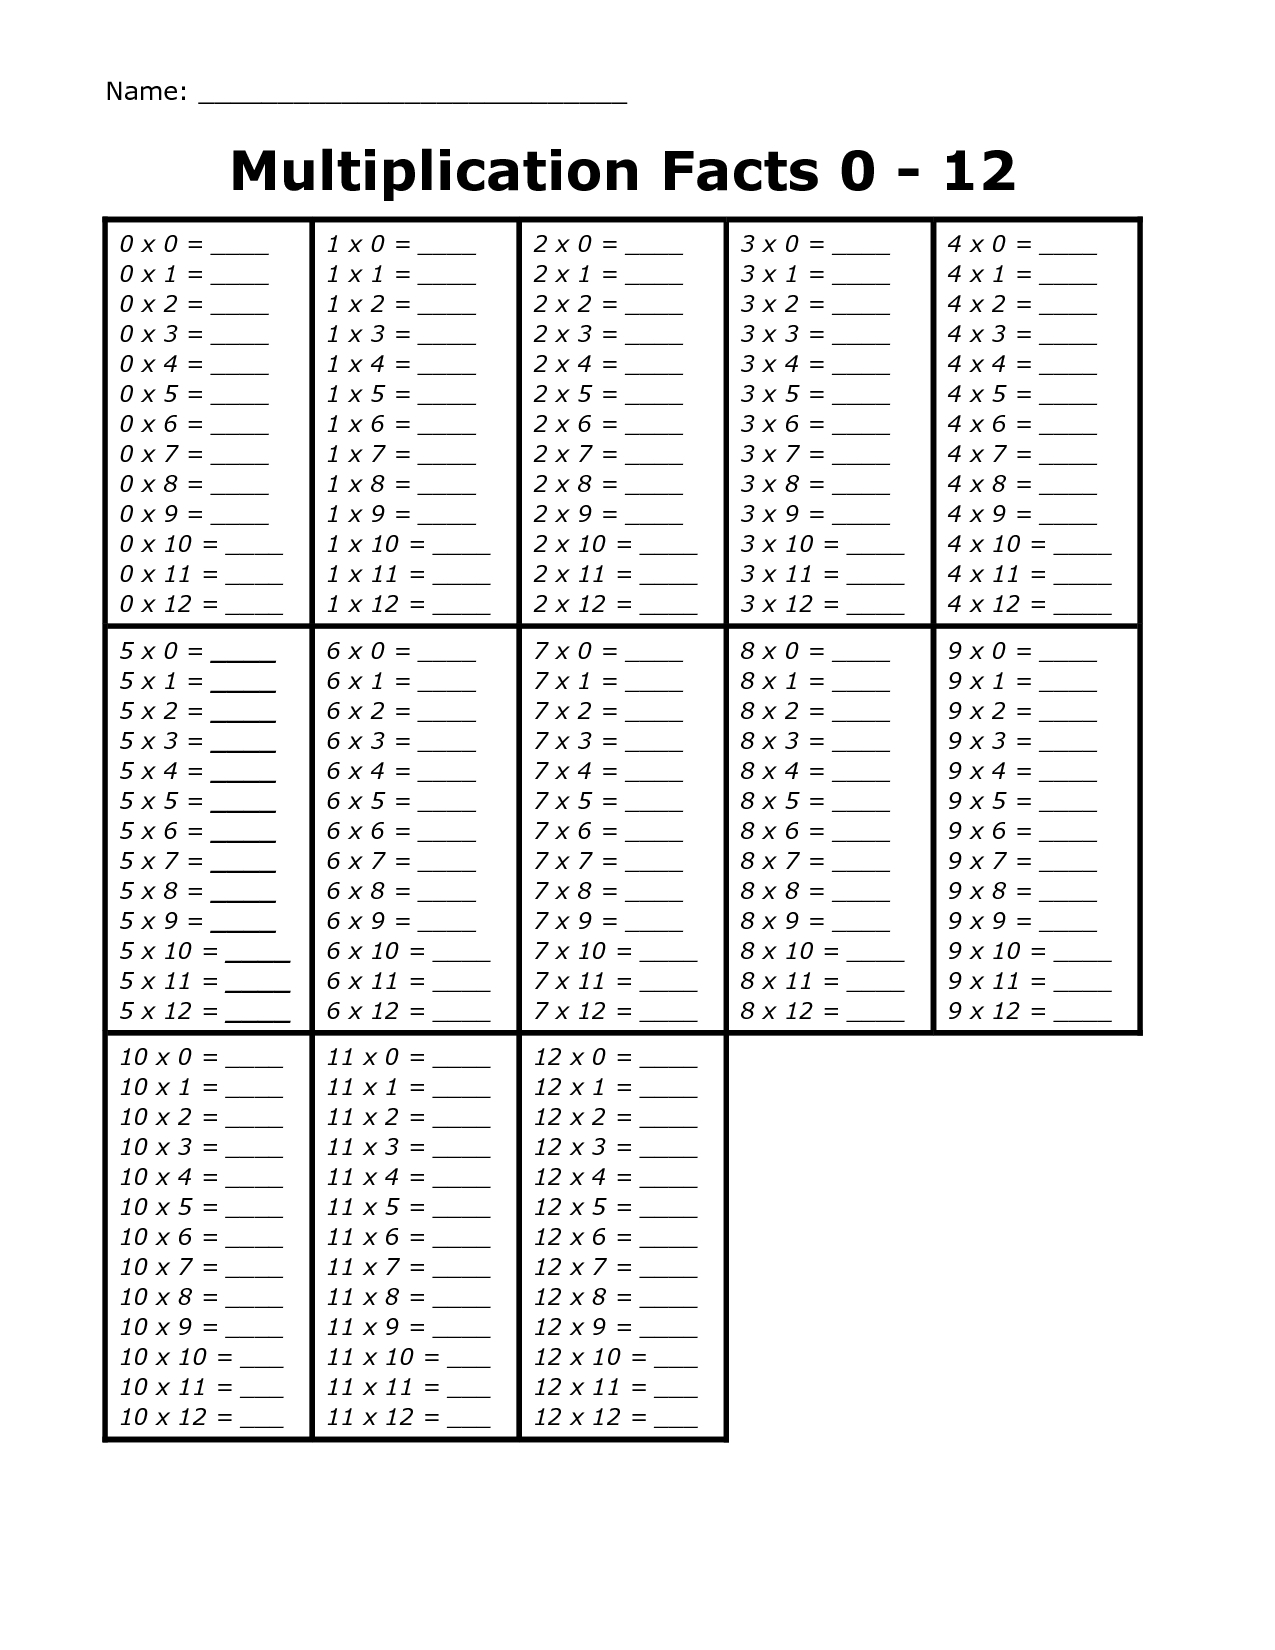 Printable Blank Multiplication Table 0-12 for Printable Multiplication Tables 1-12